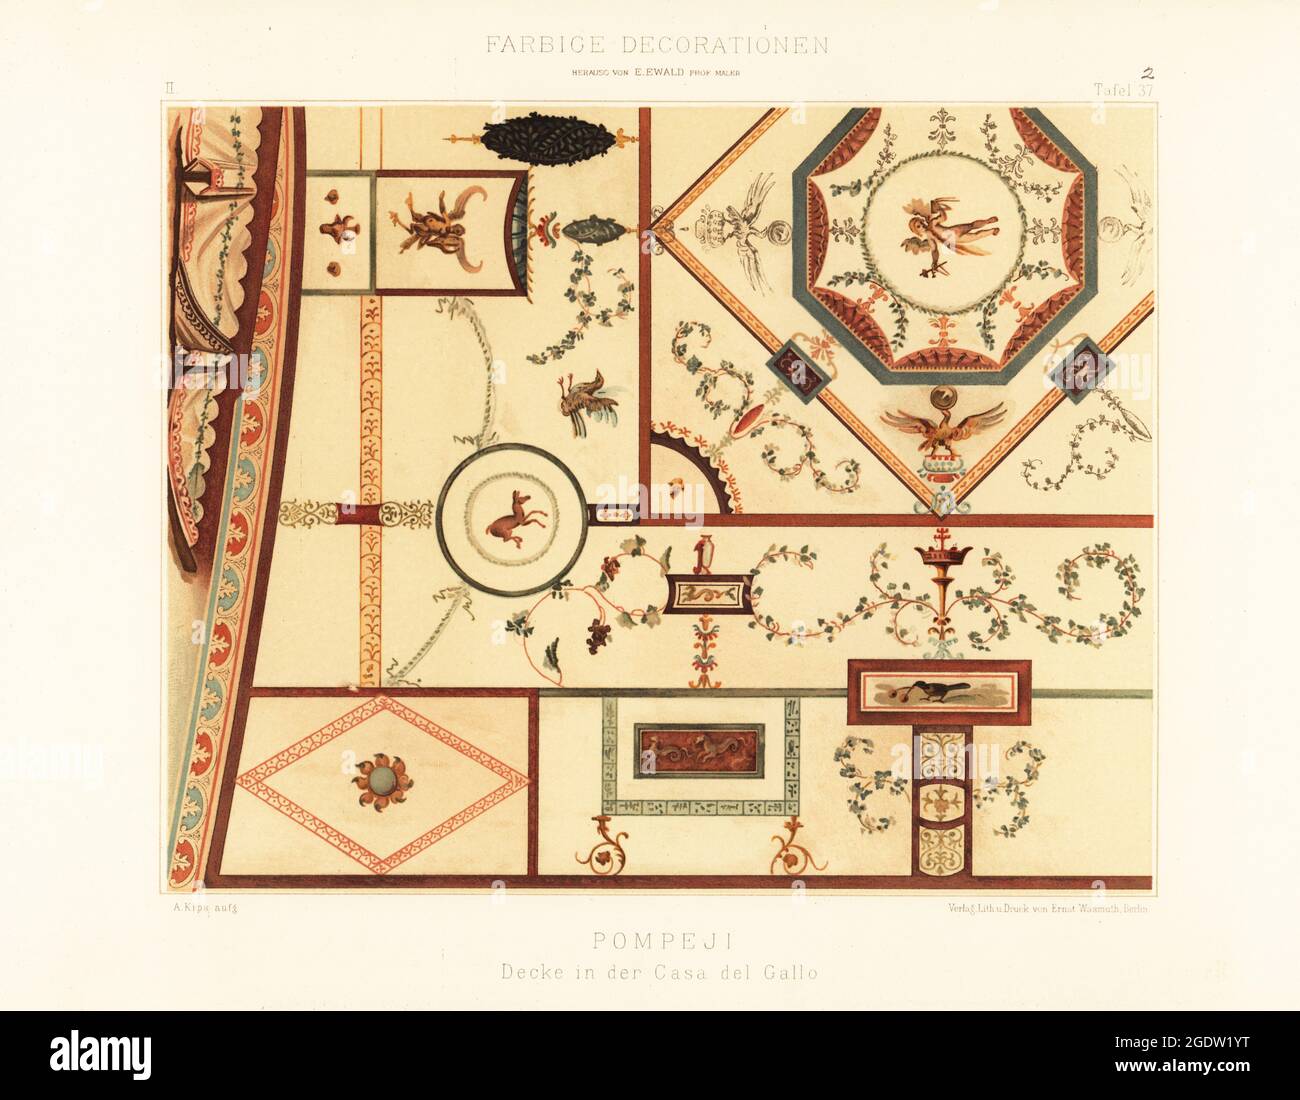 Part of a decorated ceiling from the House of Chlorus and Caprasia or Casa del Gallo II (Reg. IX, Ins. II, No. 10), Pompeii, Italy. Decke in der Casa del Gallo, Pompeji. Chromolithograph by A. Kips from Ernst Ewald’s Farbige decorationen, alter und never Zeit (Color decoration, ancient and new eras), Ernst Wasmuth, Berlin, 1889. Stock Photo